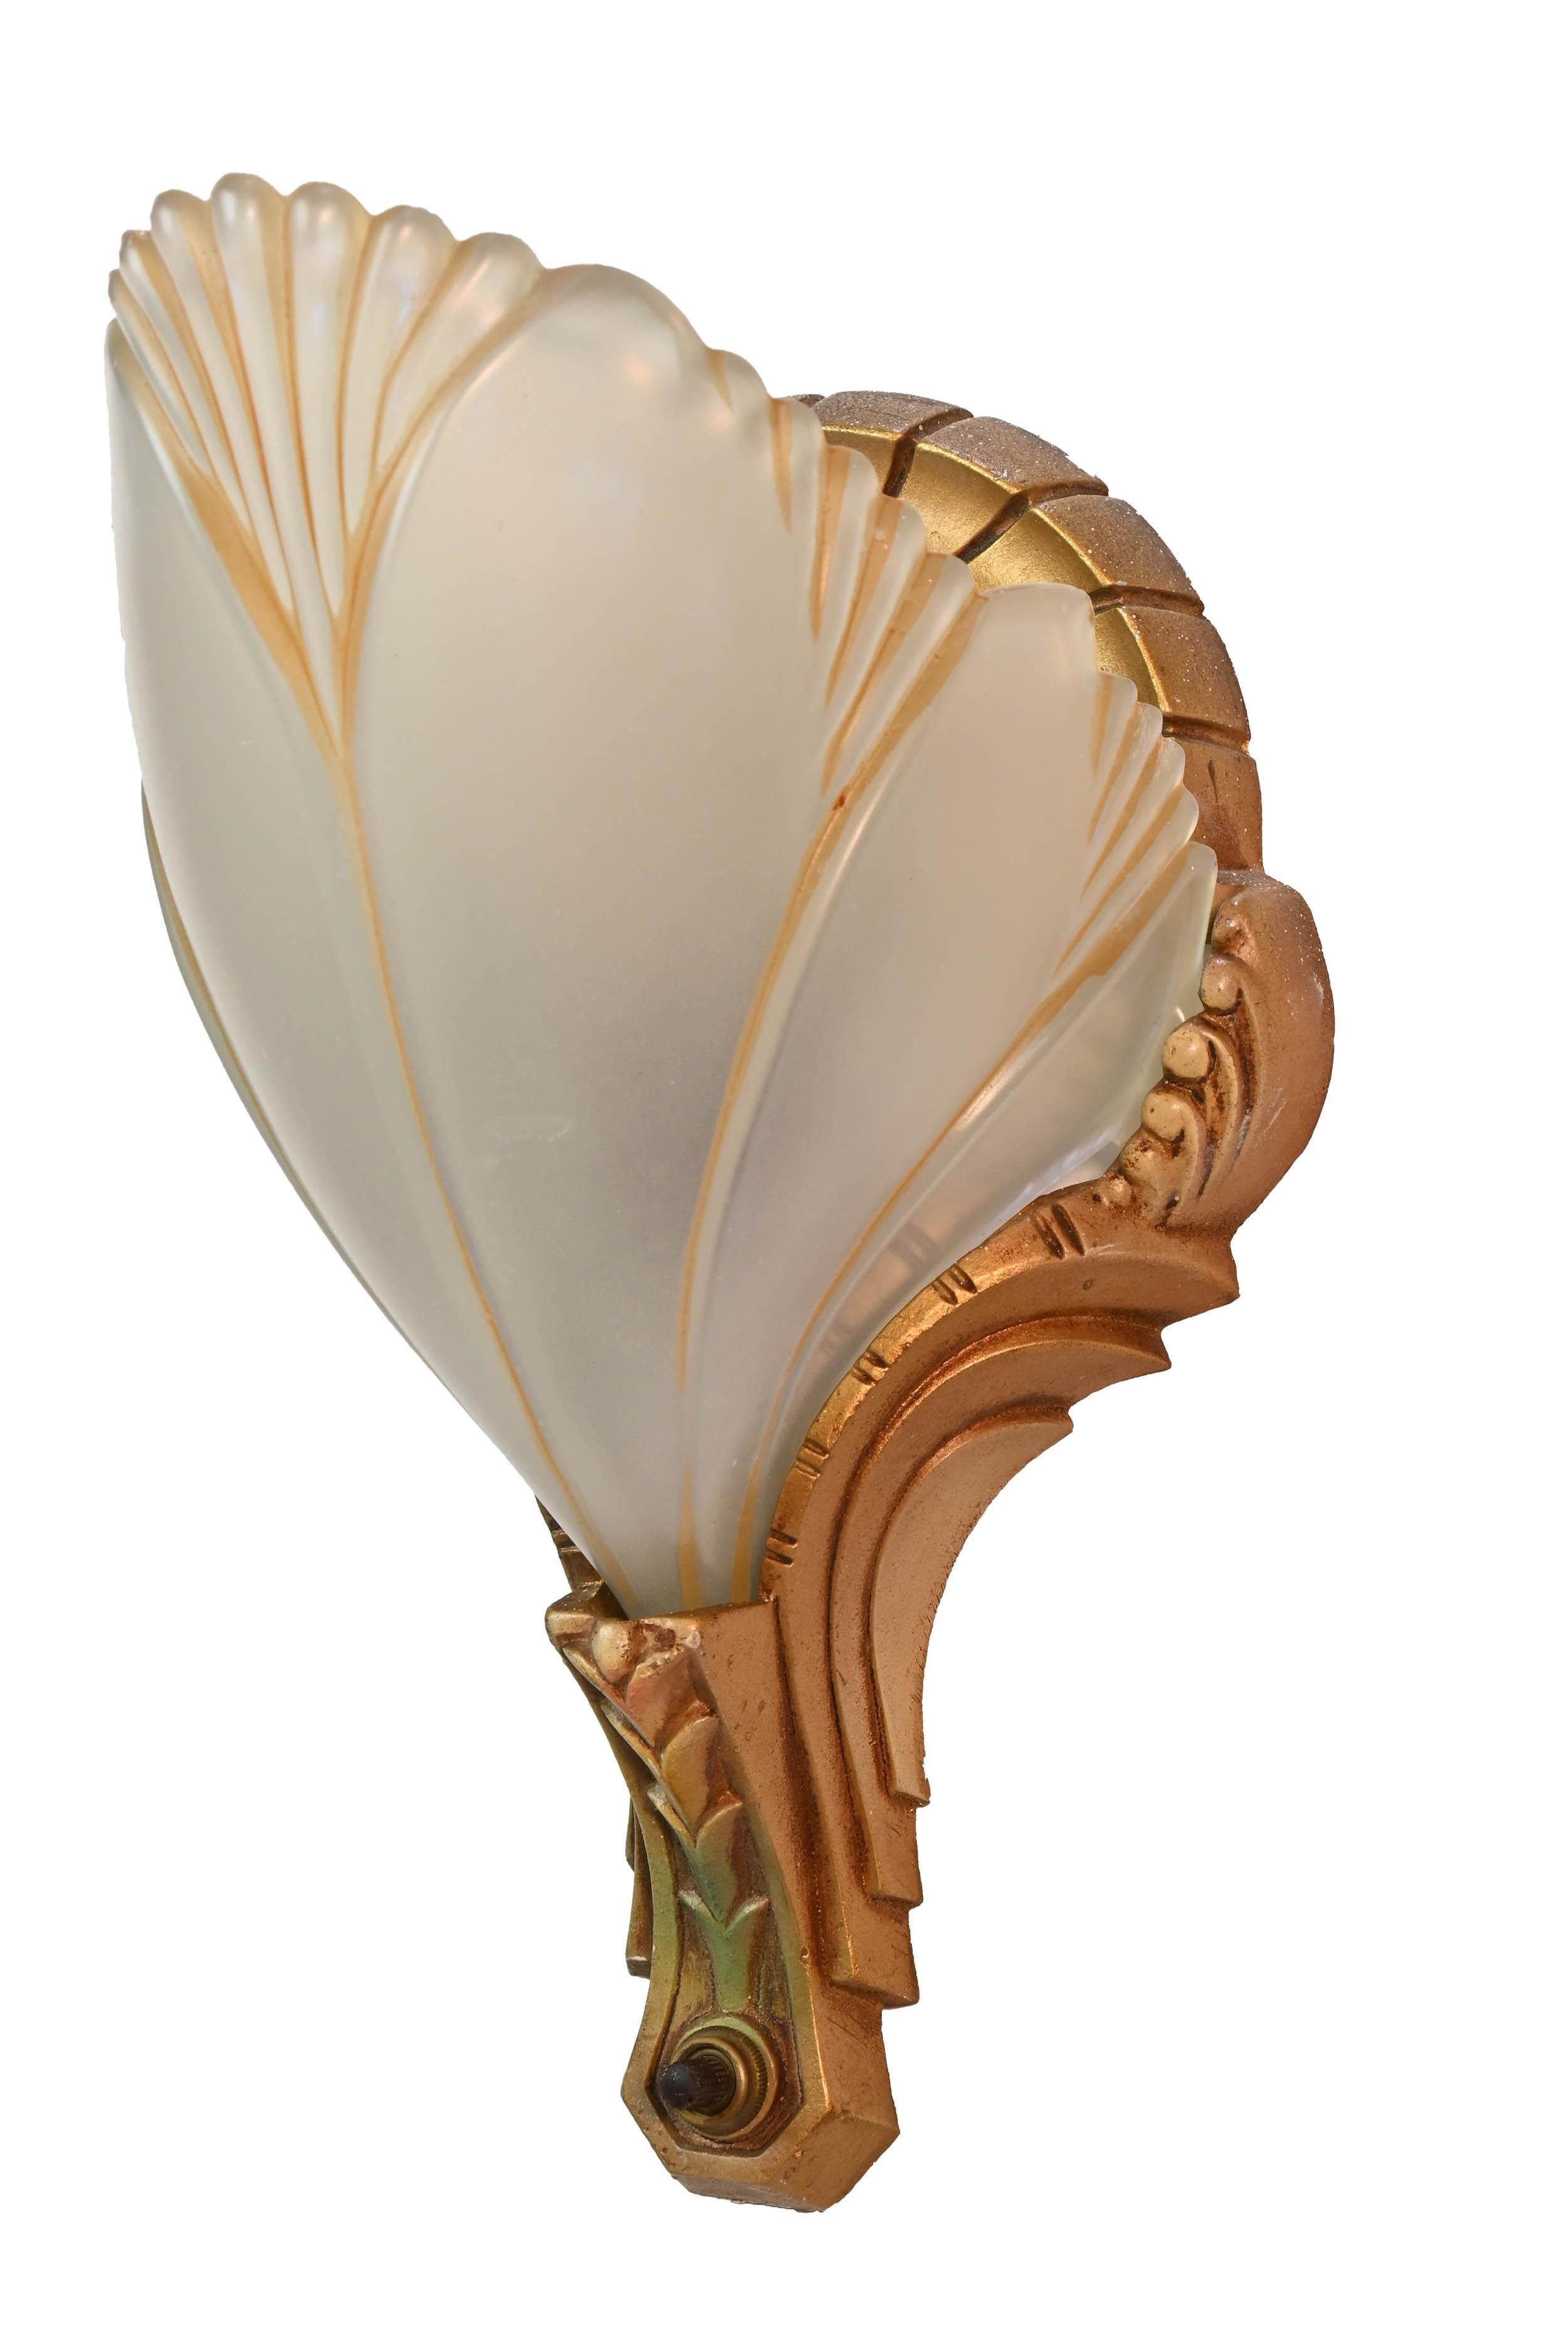 Beautiful gold painted cast aluminum fixtures by Markel. These batwings are elegantly lined in gold with pastel polychrome accents. 

Illumination: 1 standard Edison sockets
Dimensions: 9” height x 5 1/2” wide & 6” projection 

We find that